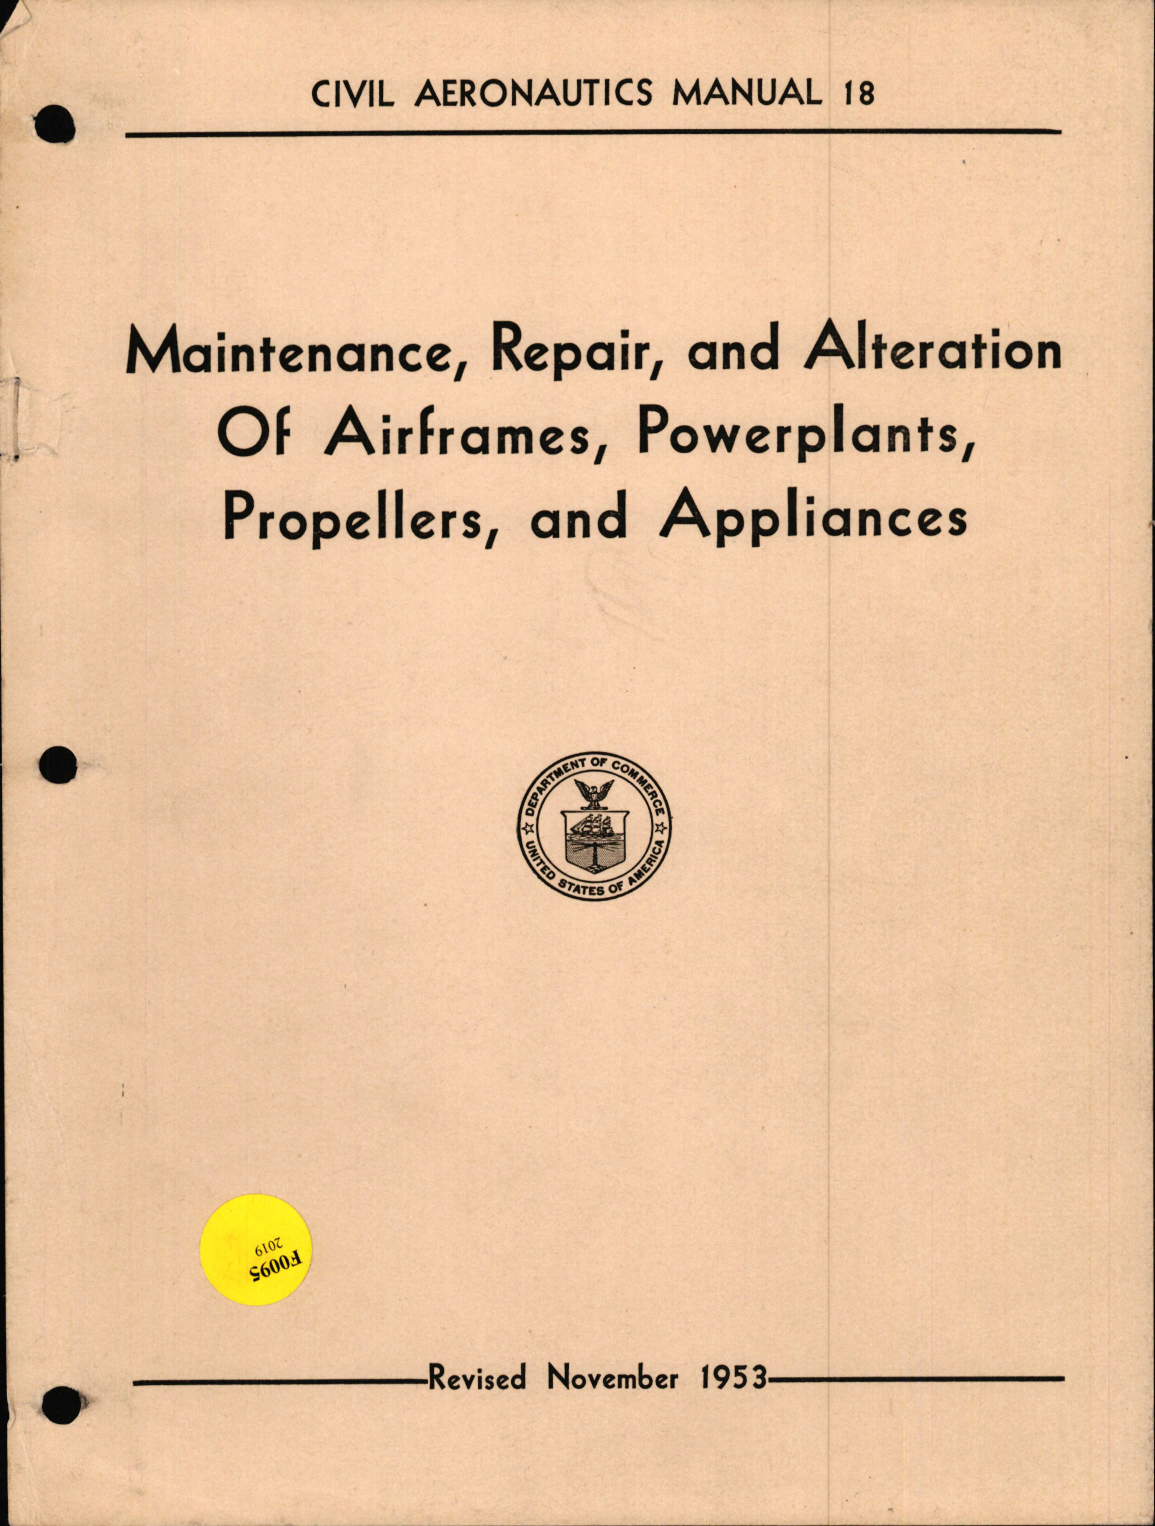 Sample page 1 from AirCorps Library document: Maintenance, Repair, & Alteration of Airframes, Powerplants, Propellers, & Appliances